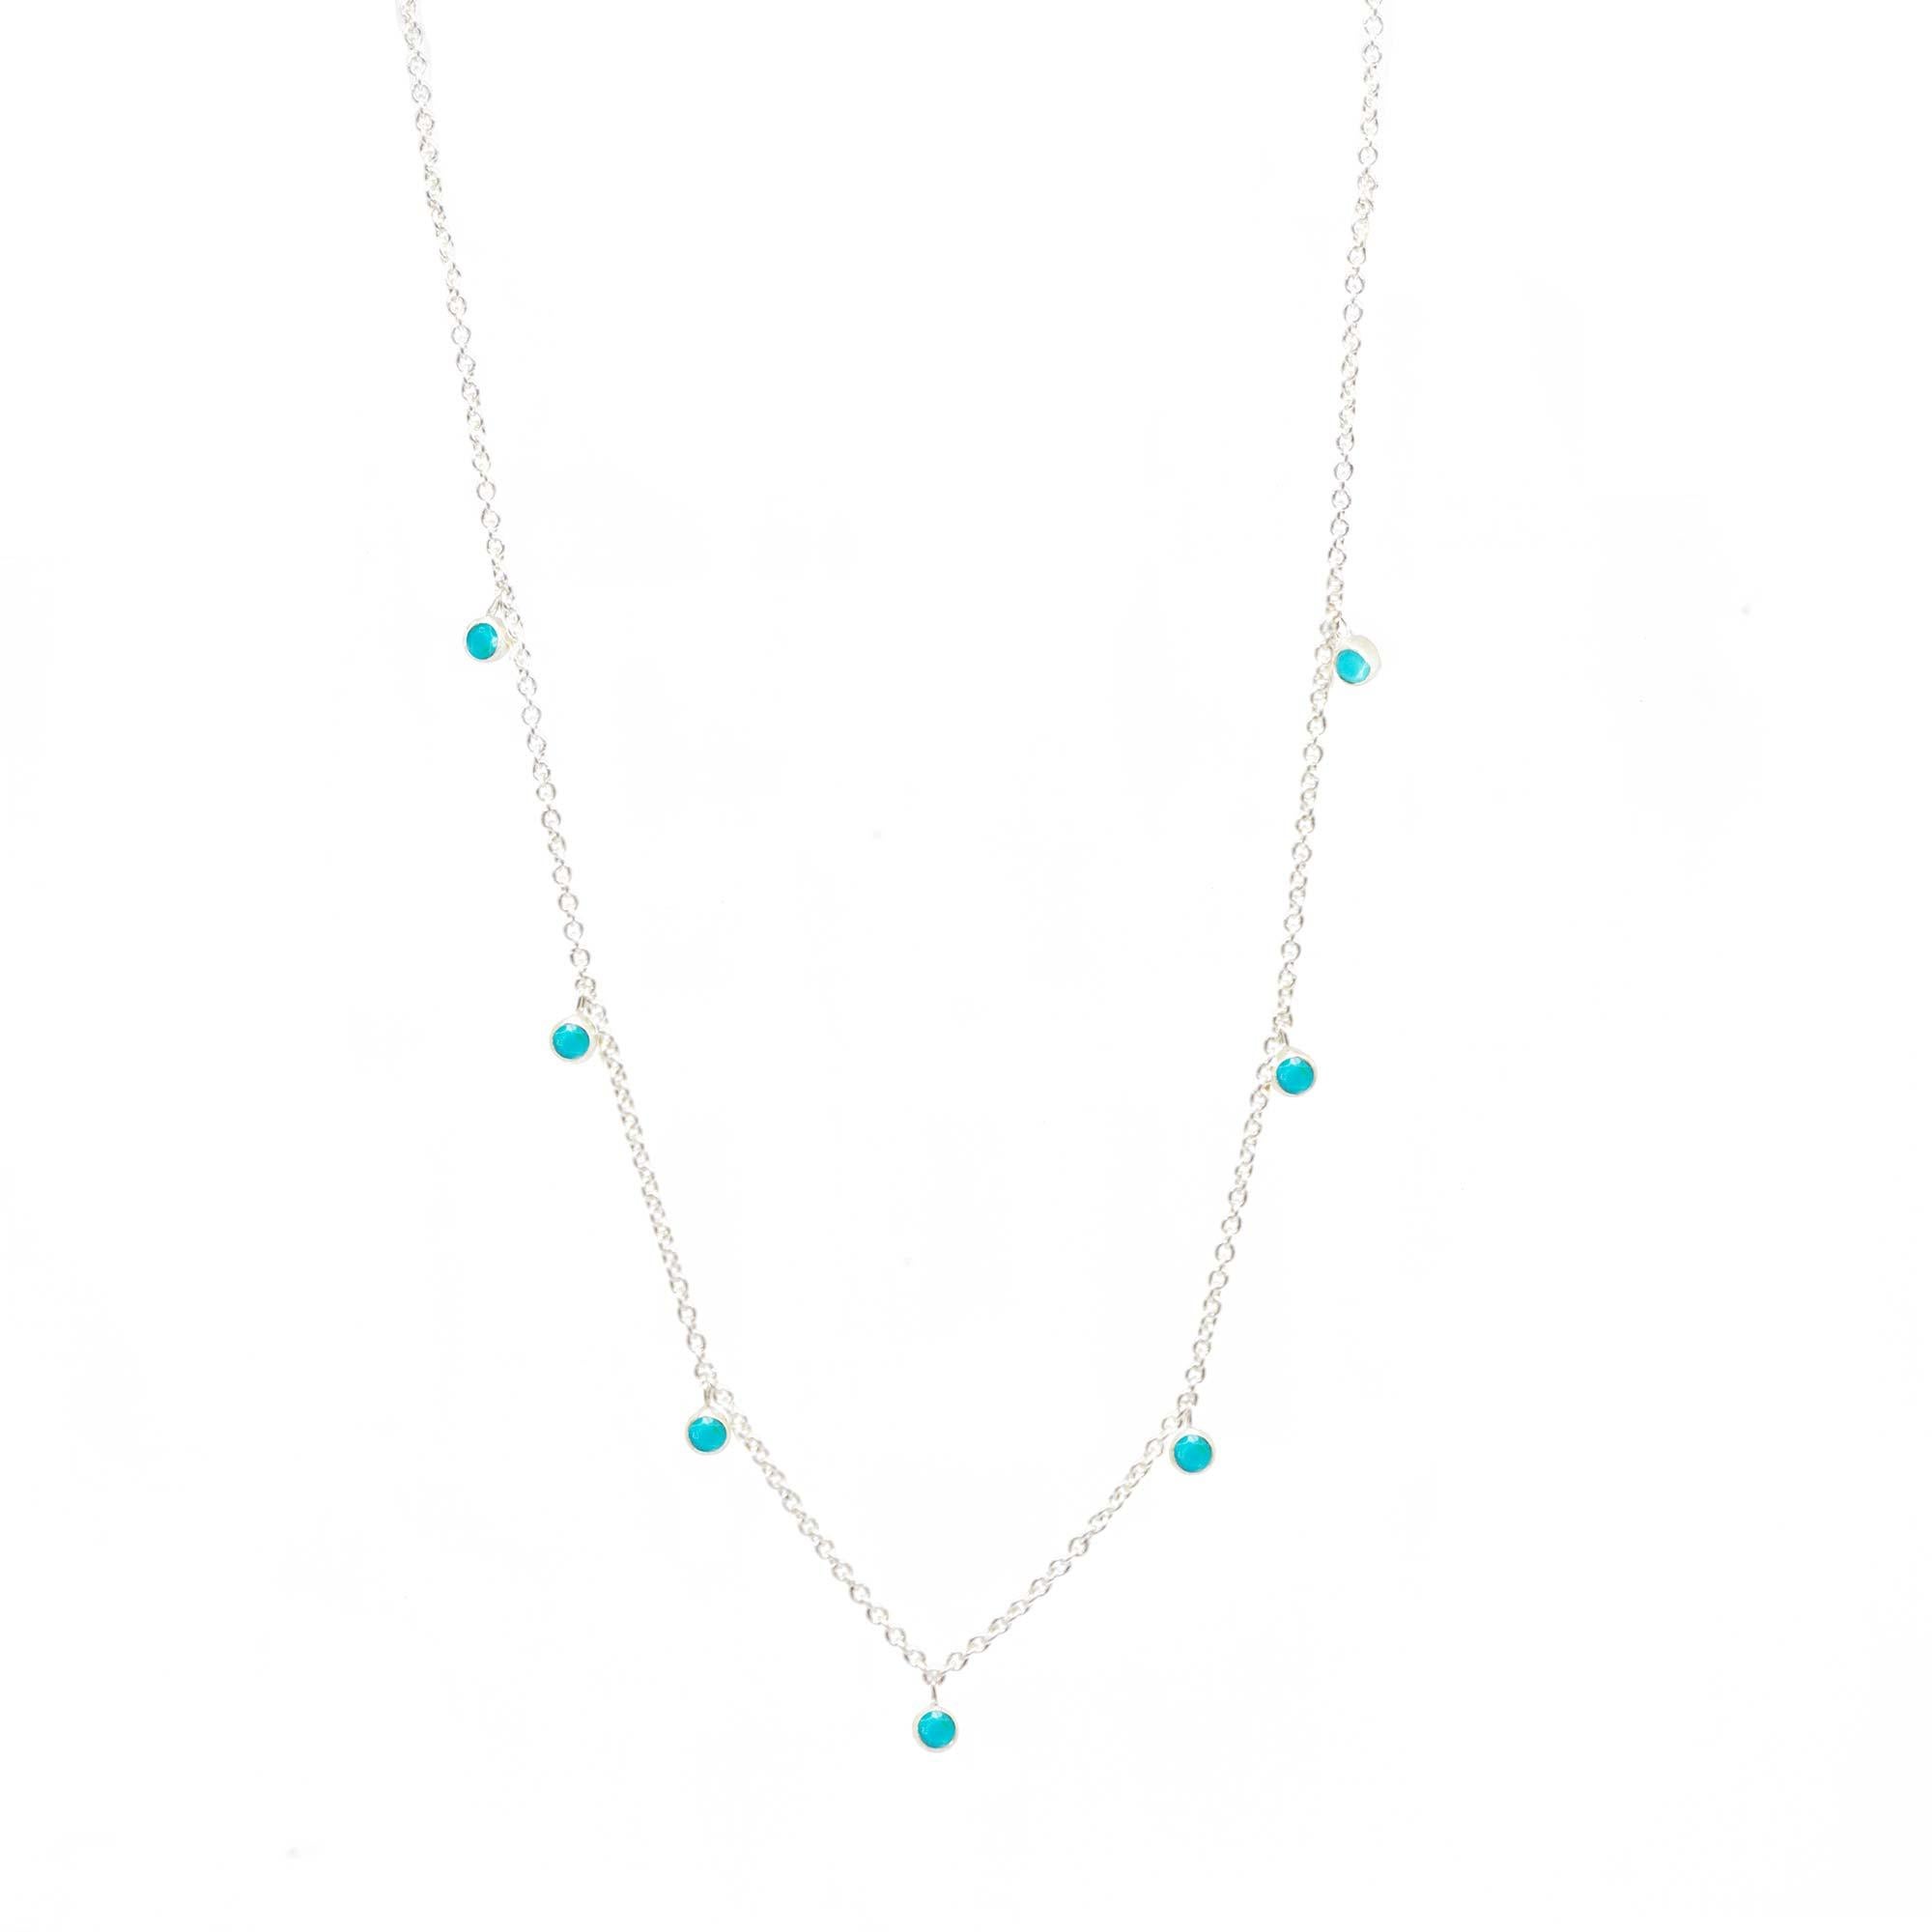 Made with turquoise gemstone rimmed in sterling silver, our Forged Silver Necklace provides an effortless, yet fashionable style. 

Metal: Sterling Silver
Stone carat: 0.75
Length: 15-17''

Stone size: 2.5mm

About the stones:
Genuine Turquoise: